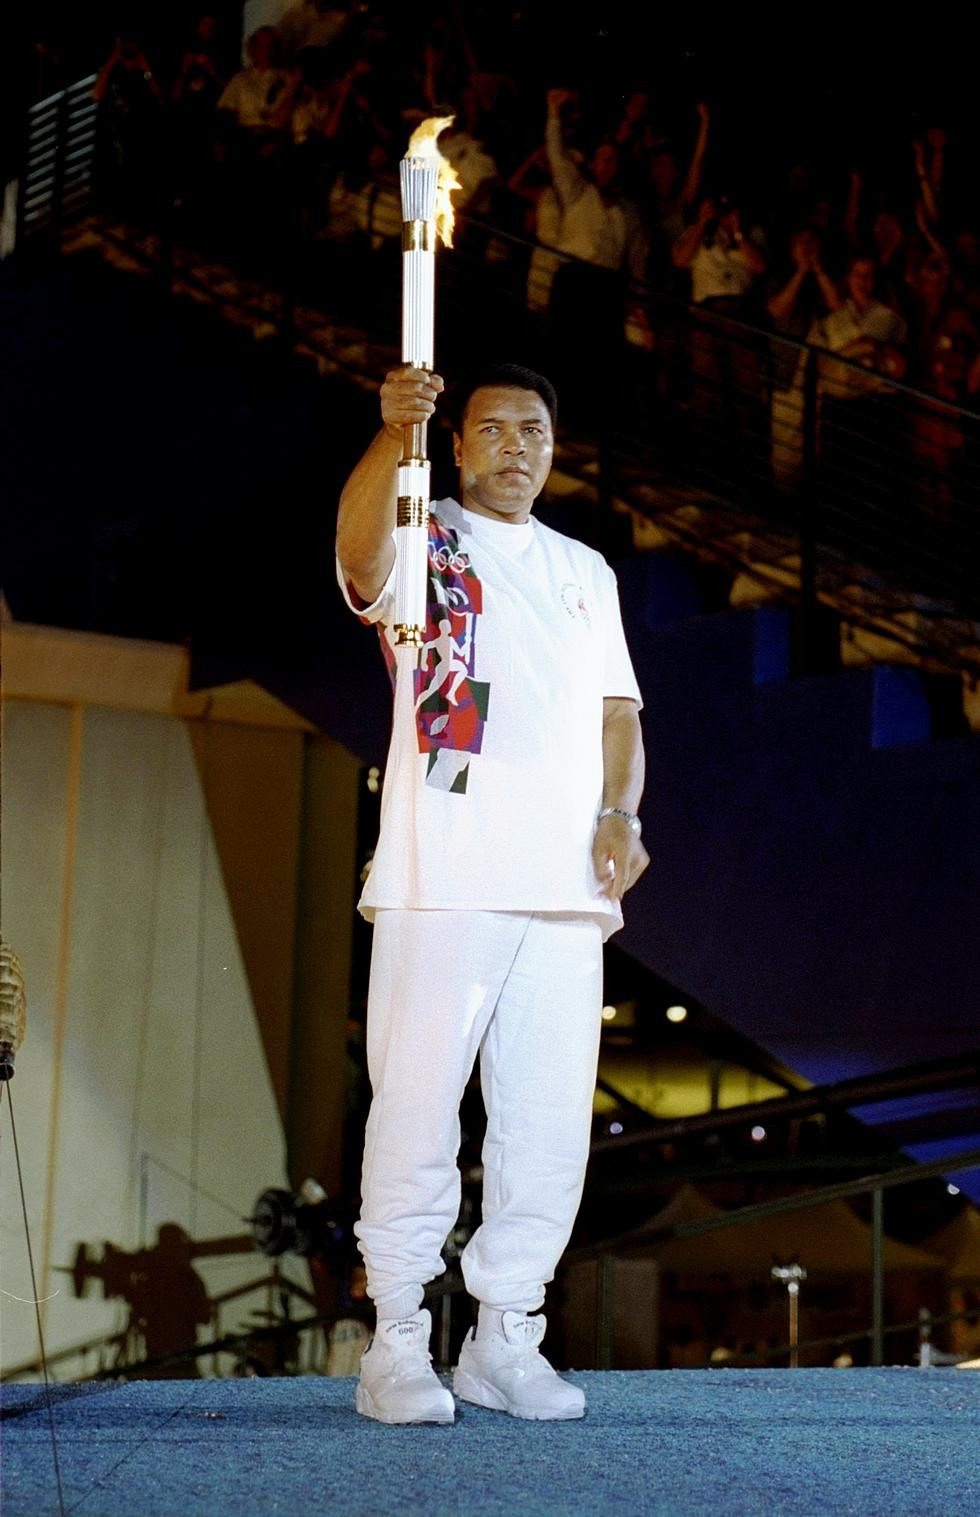 Muhammad Ali lighting the Olympic Cauldron at Atlanta 1996 remains one of the Games' most iconic moments ©Getty Images